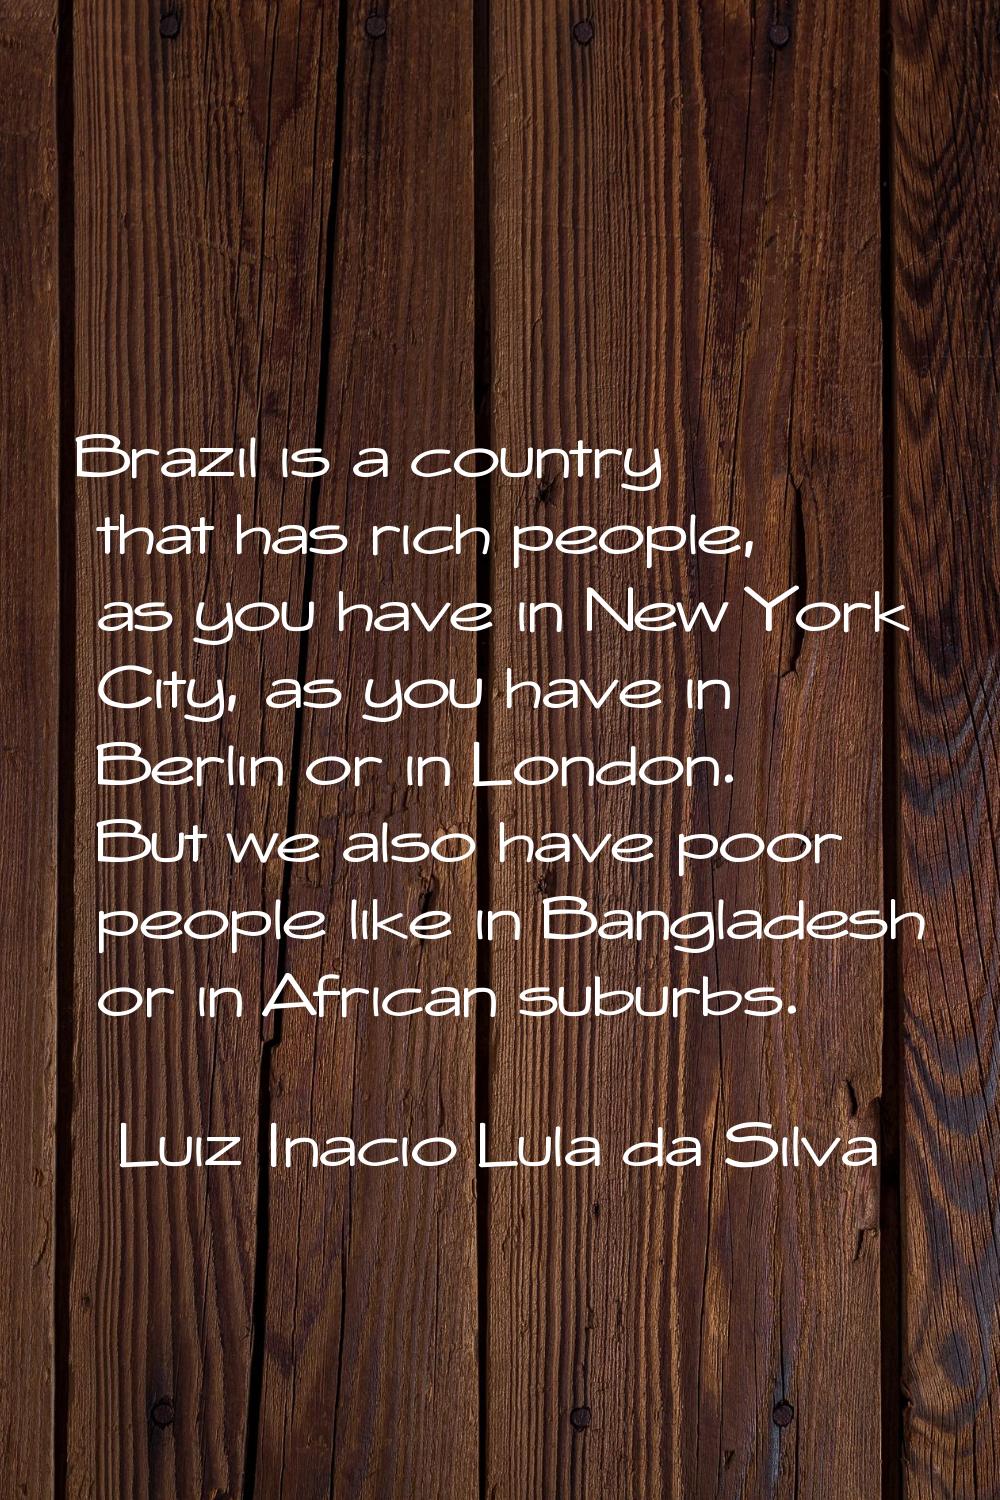 Brazil is a country that has rich people, as you have in New York City, as you have in Berlin or in